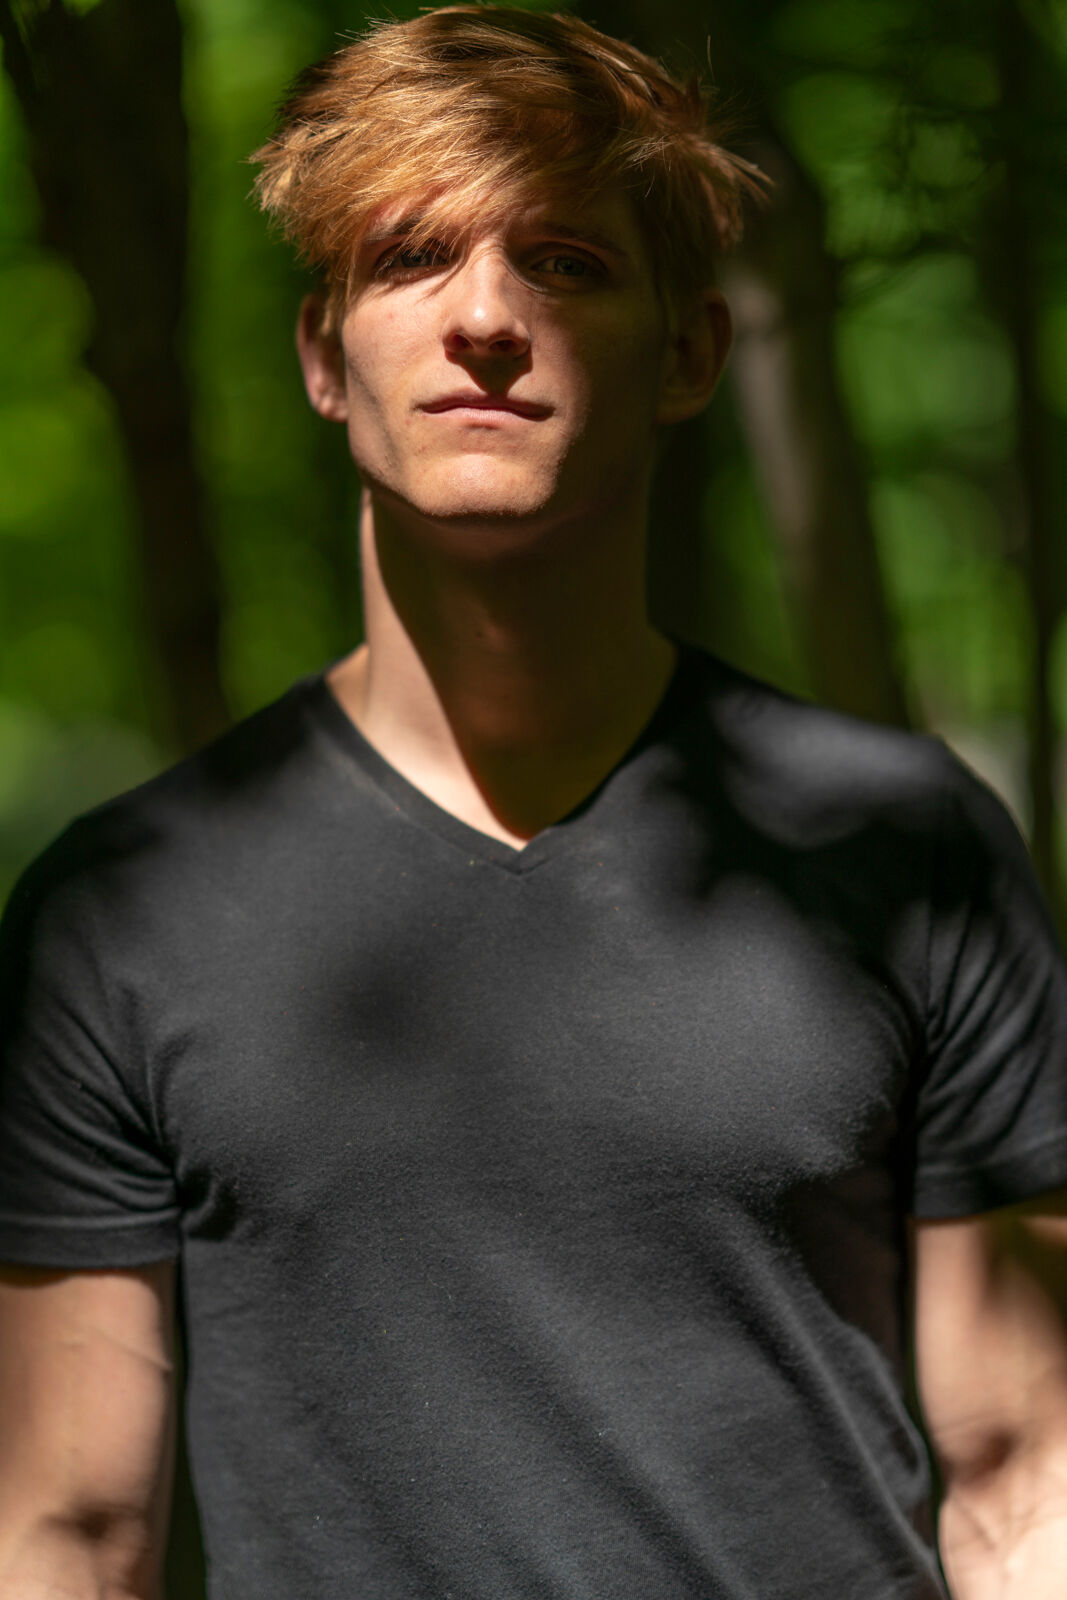 Actor, outdoors, woods, blond